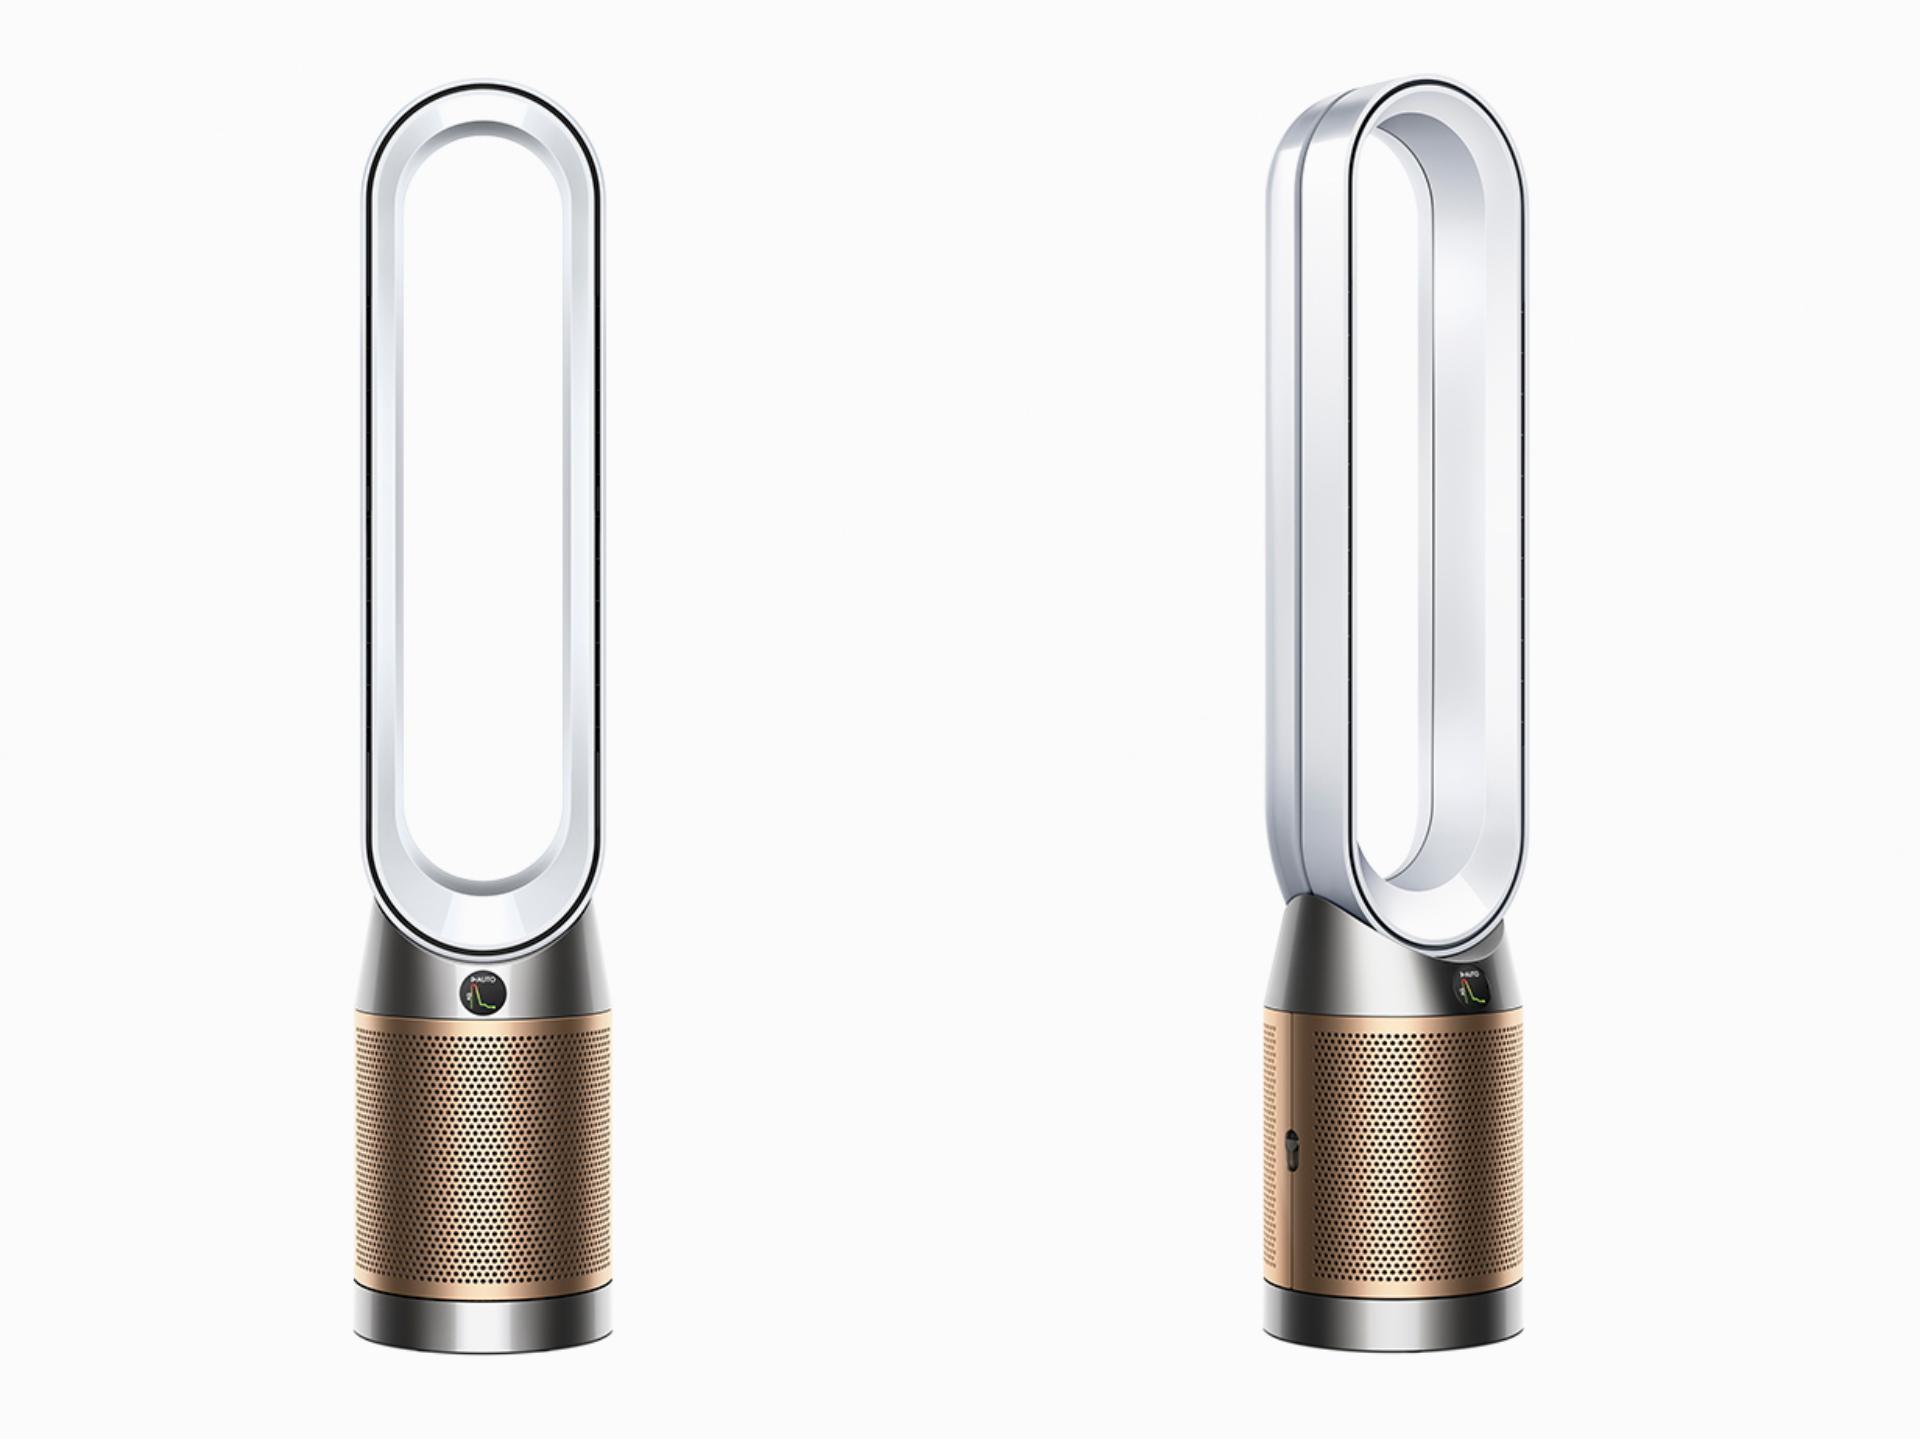 Dyson HEPA Cool Formaldehyde front and side views